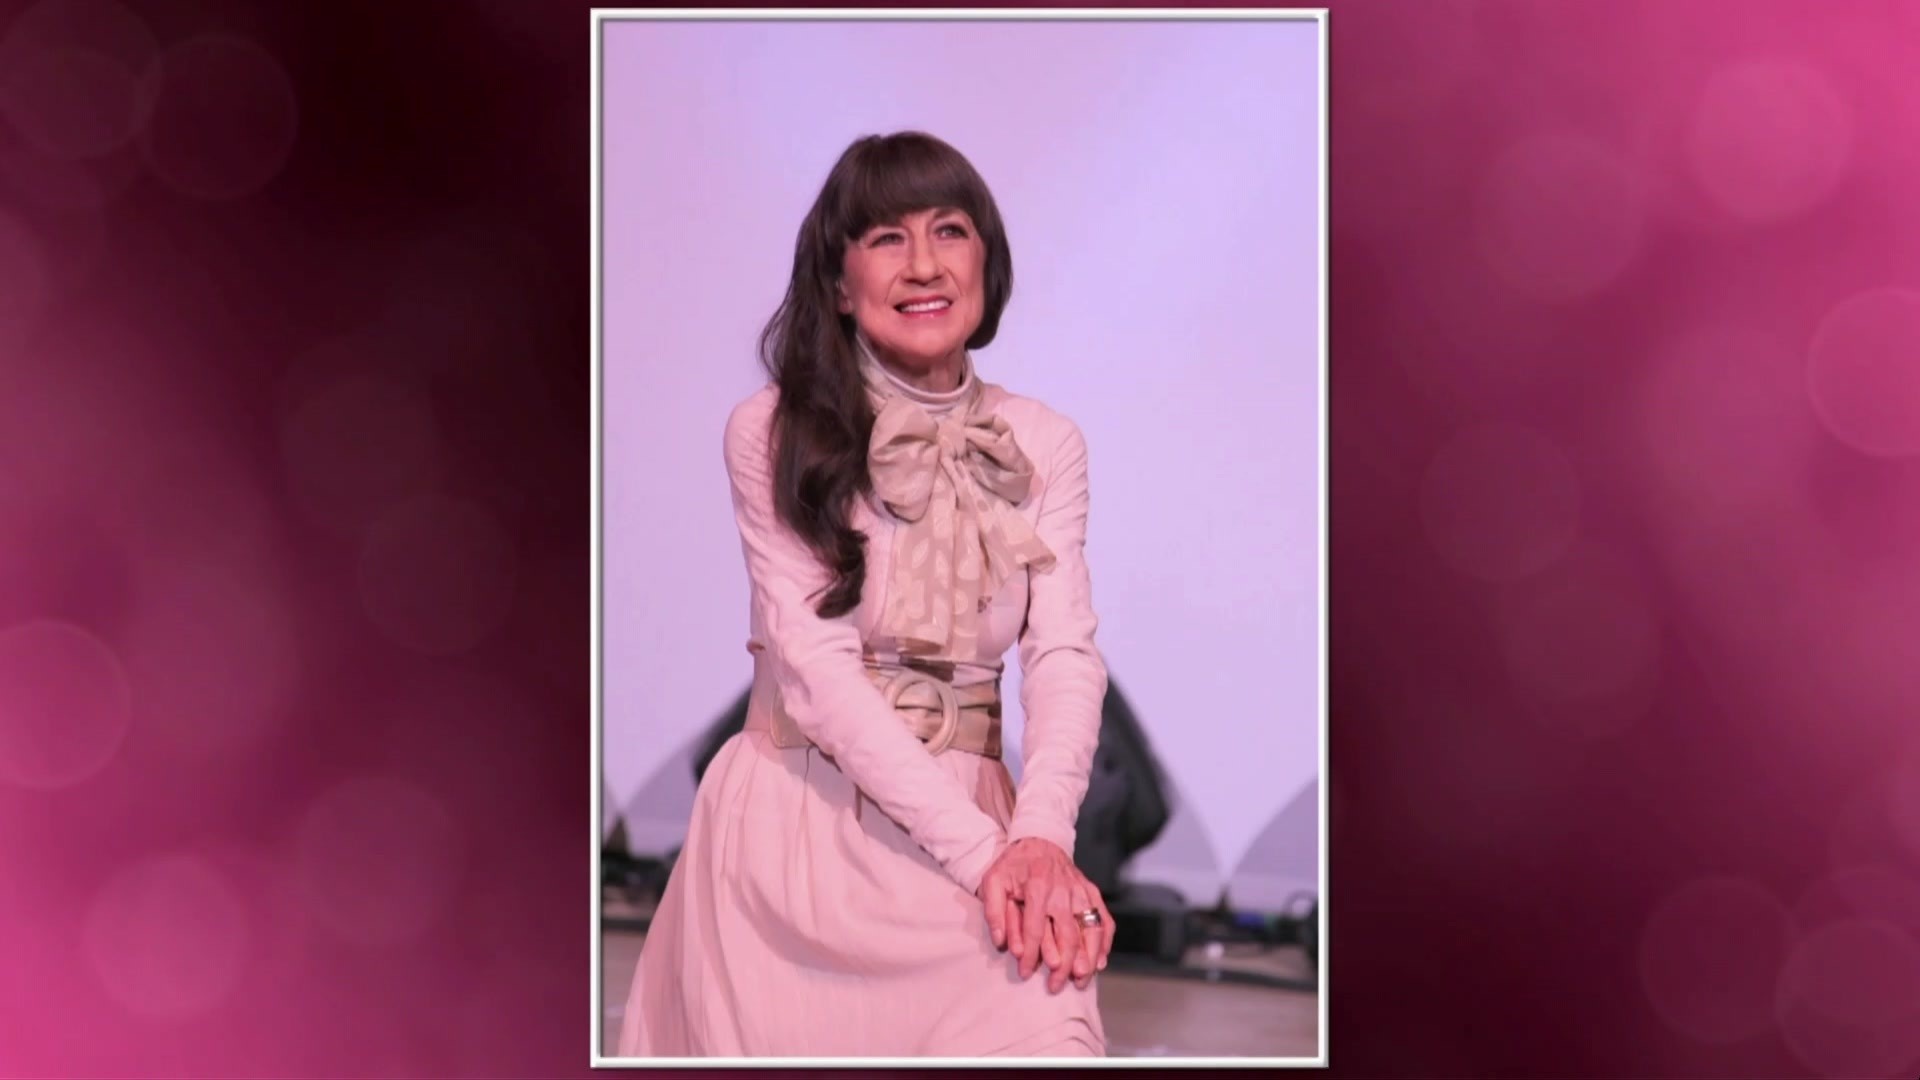 Judith Durham smiles as she sits in a photo against a pink backdrop.